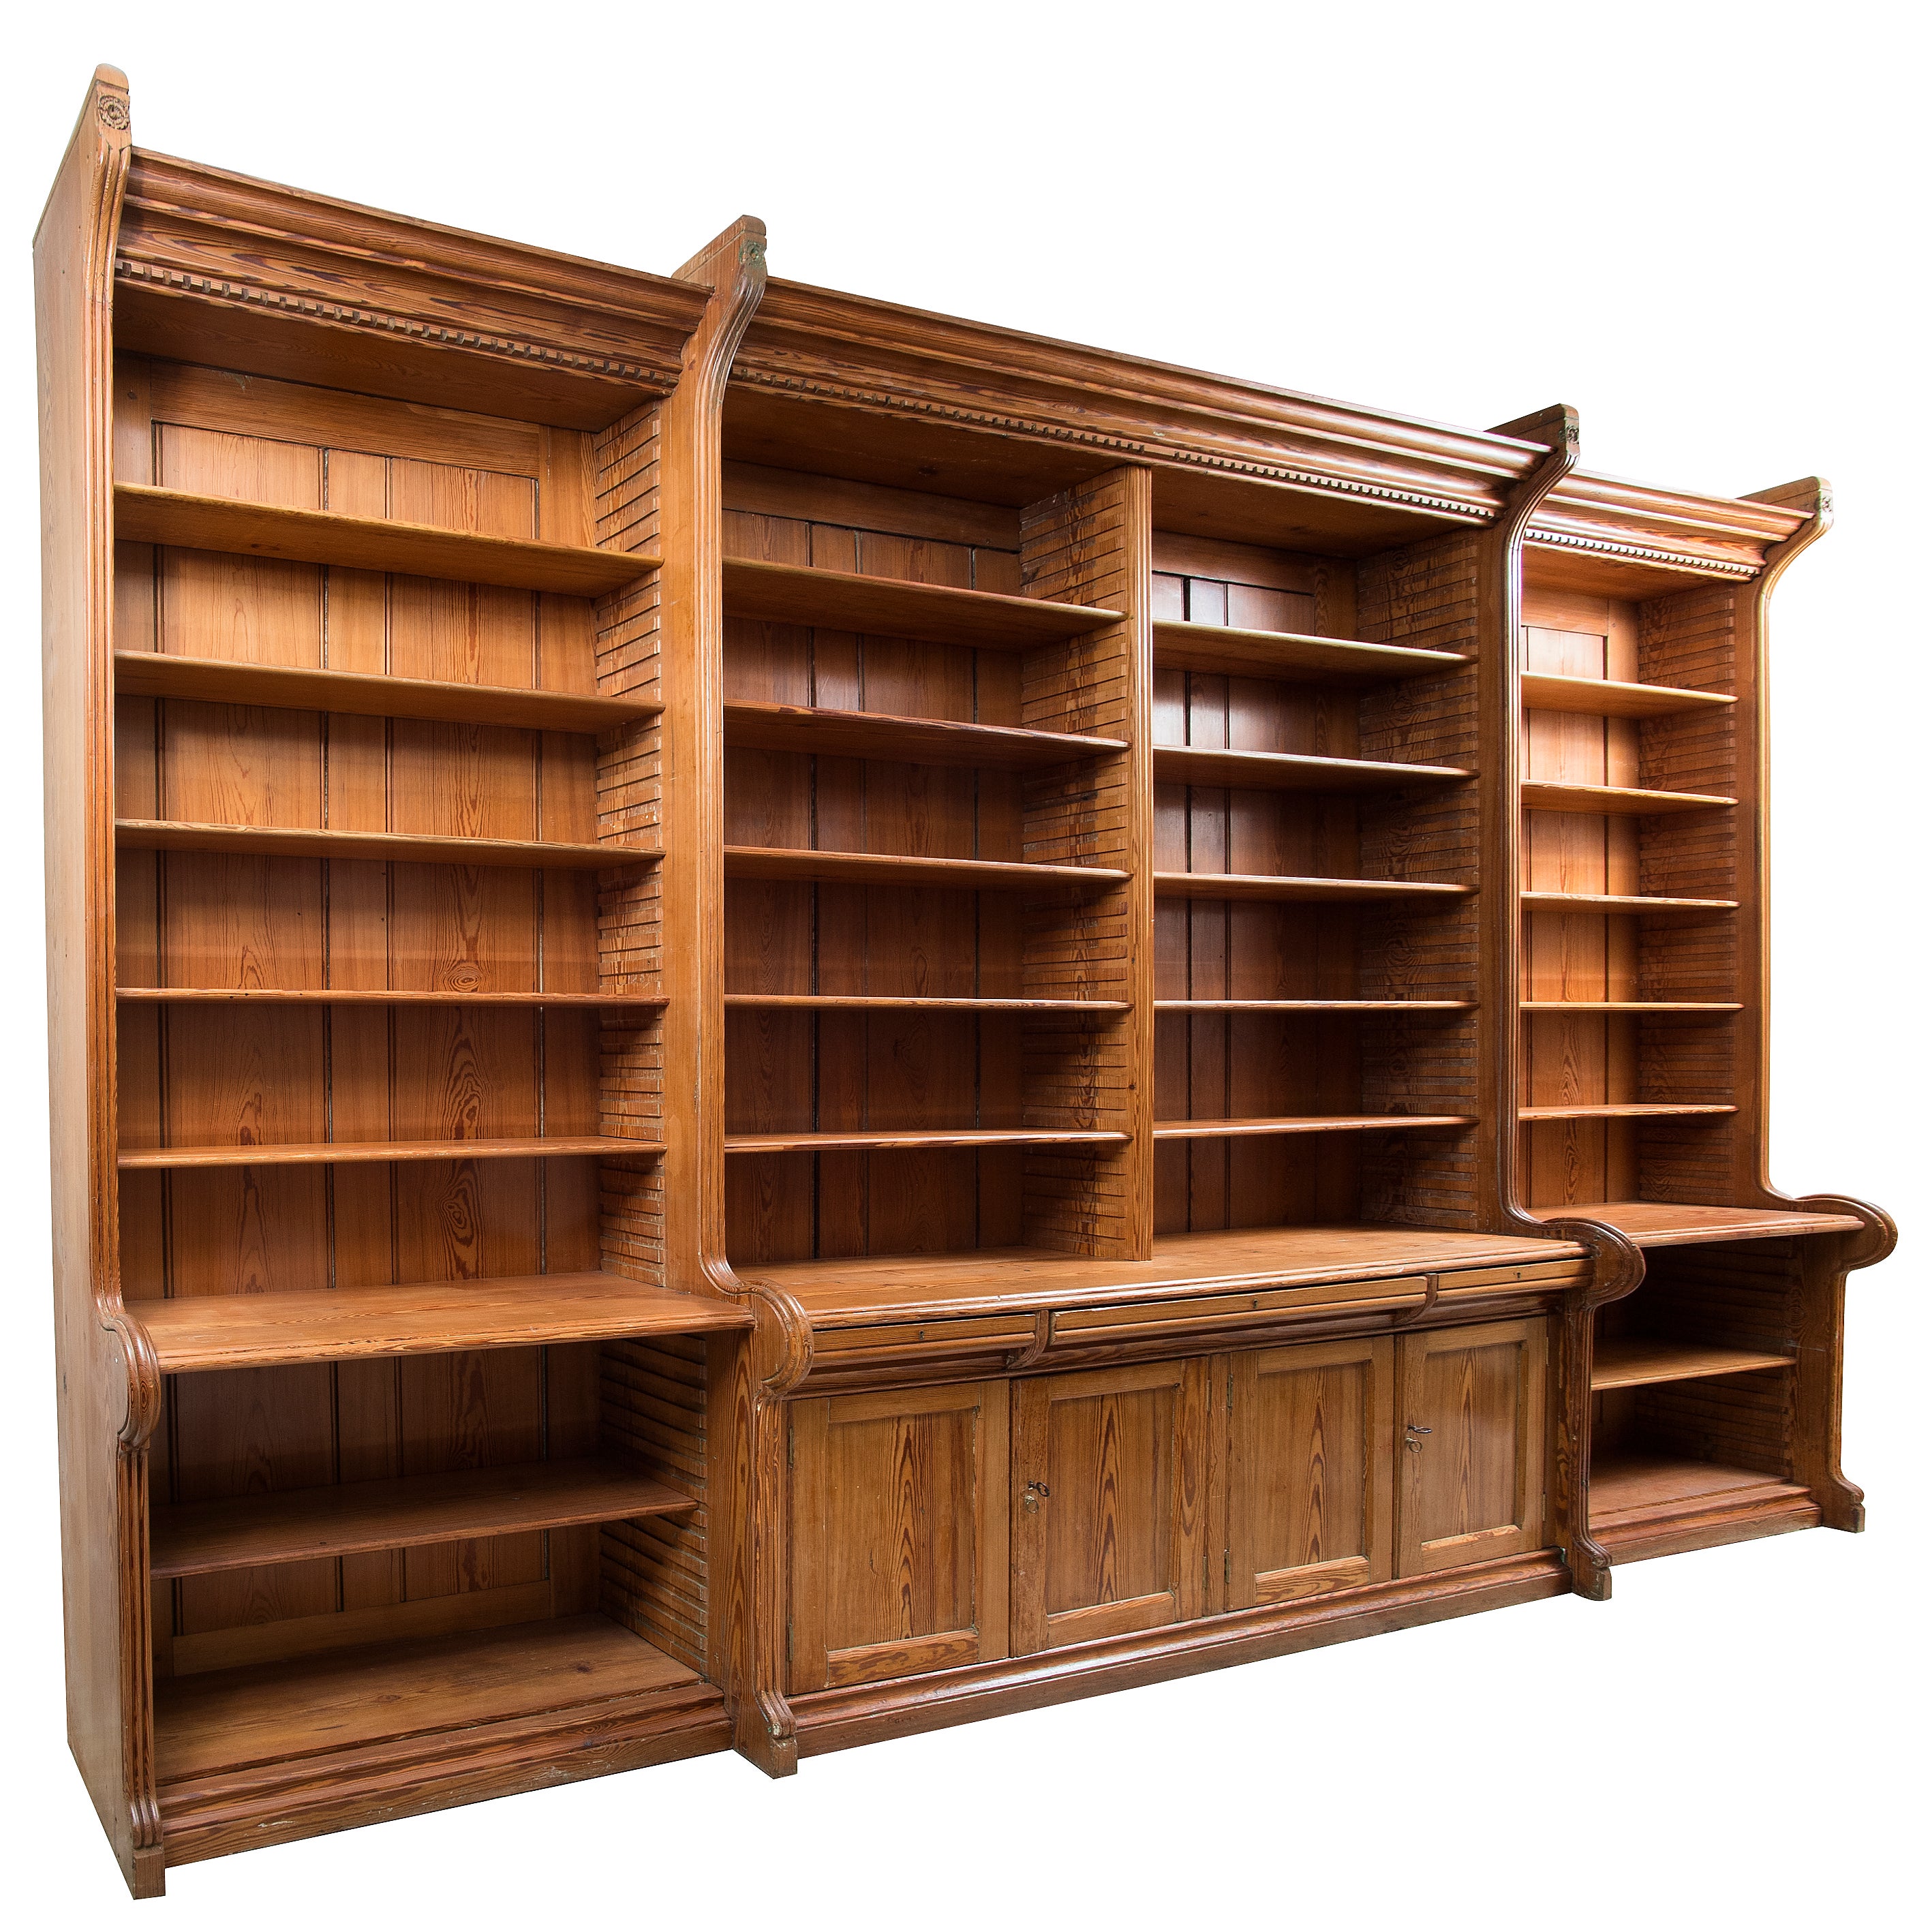 Imposing Victorian Pitch Pine Breakfront Bookcase c.1850